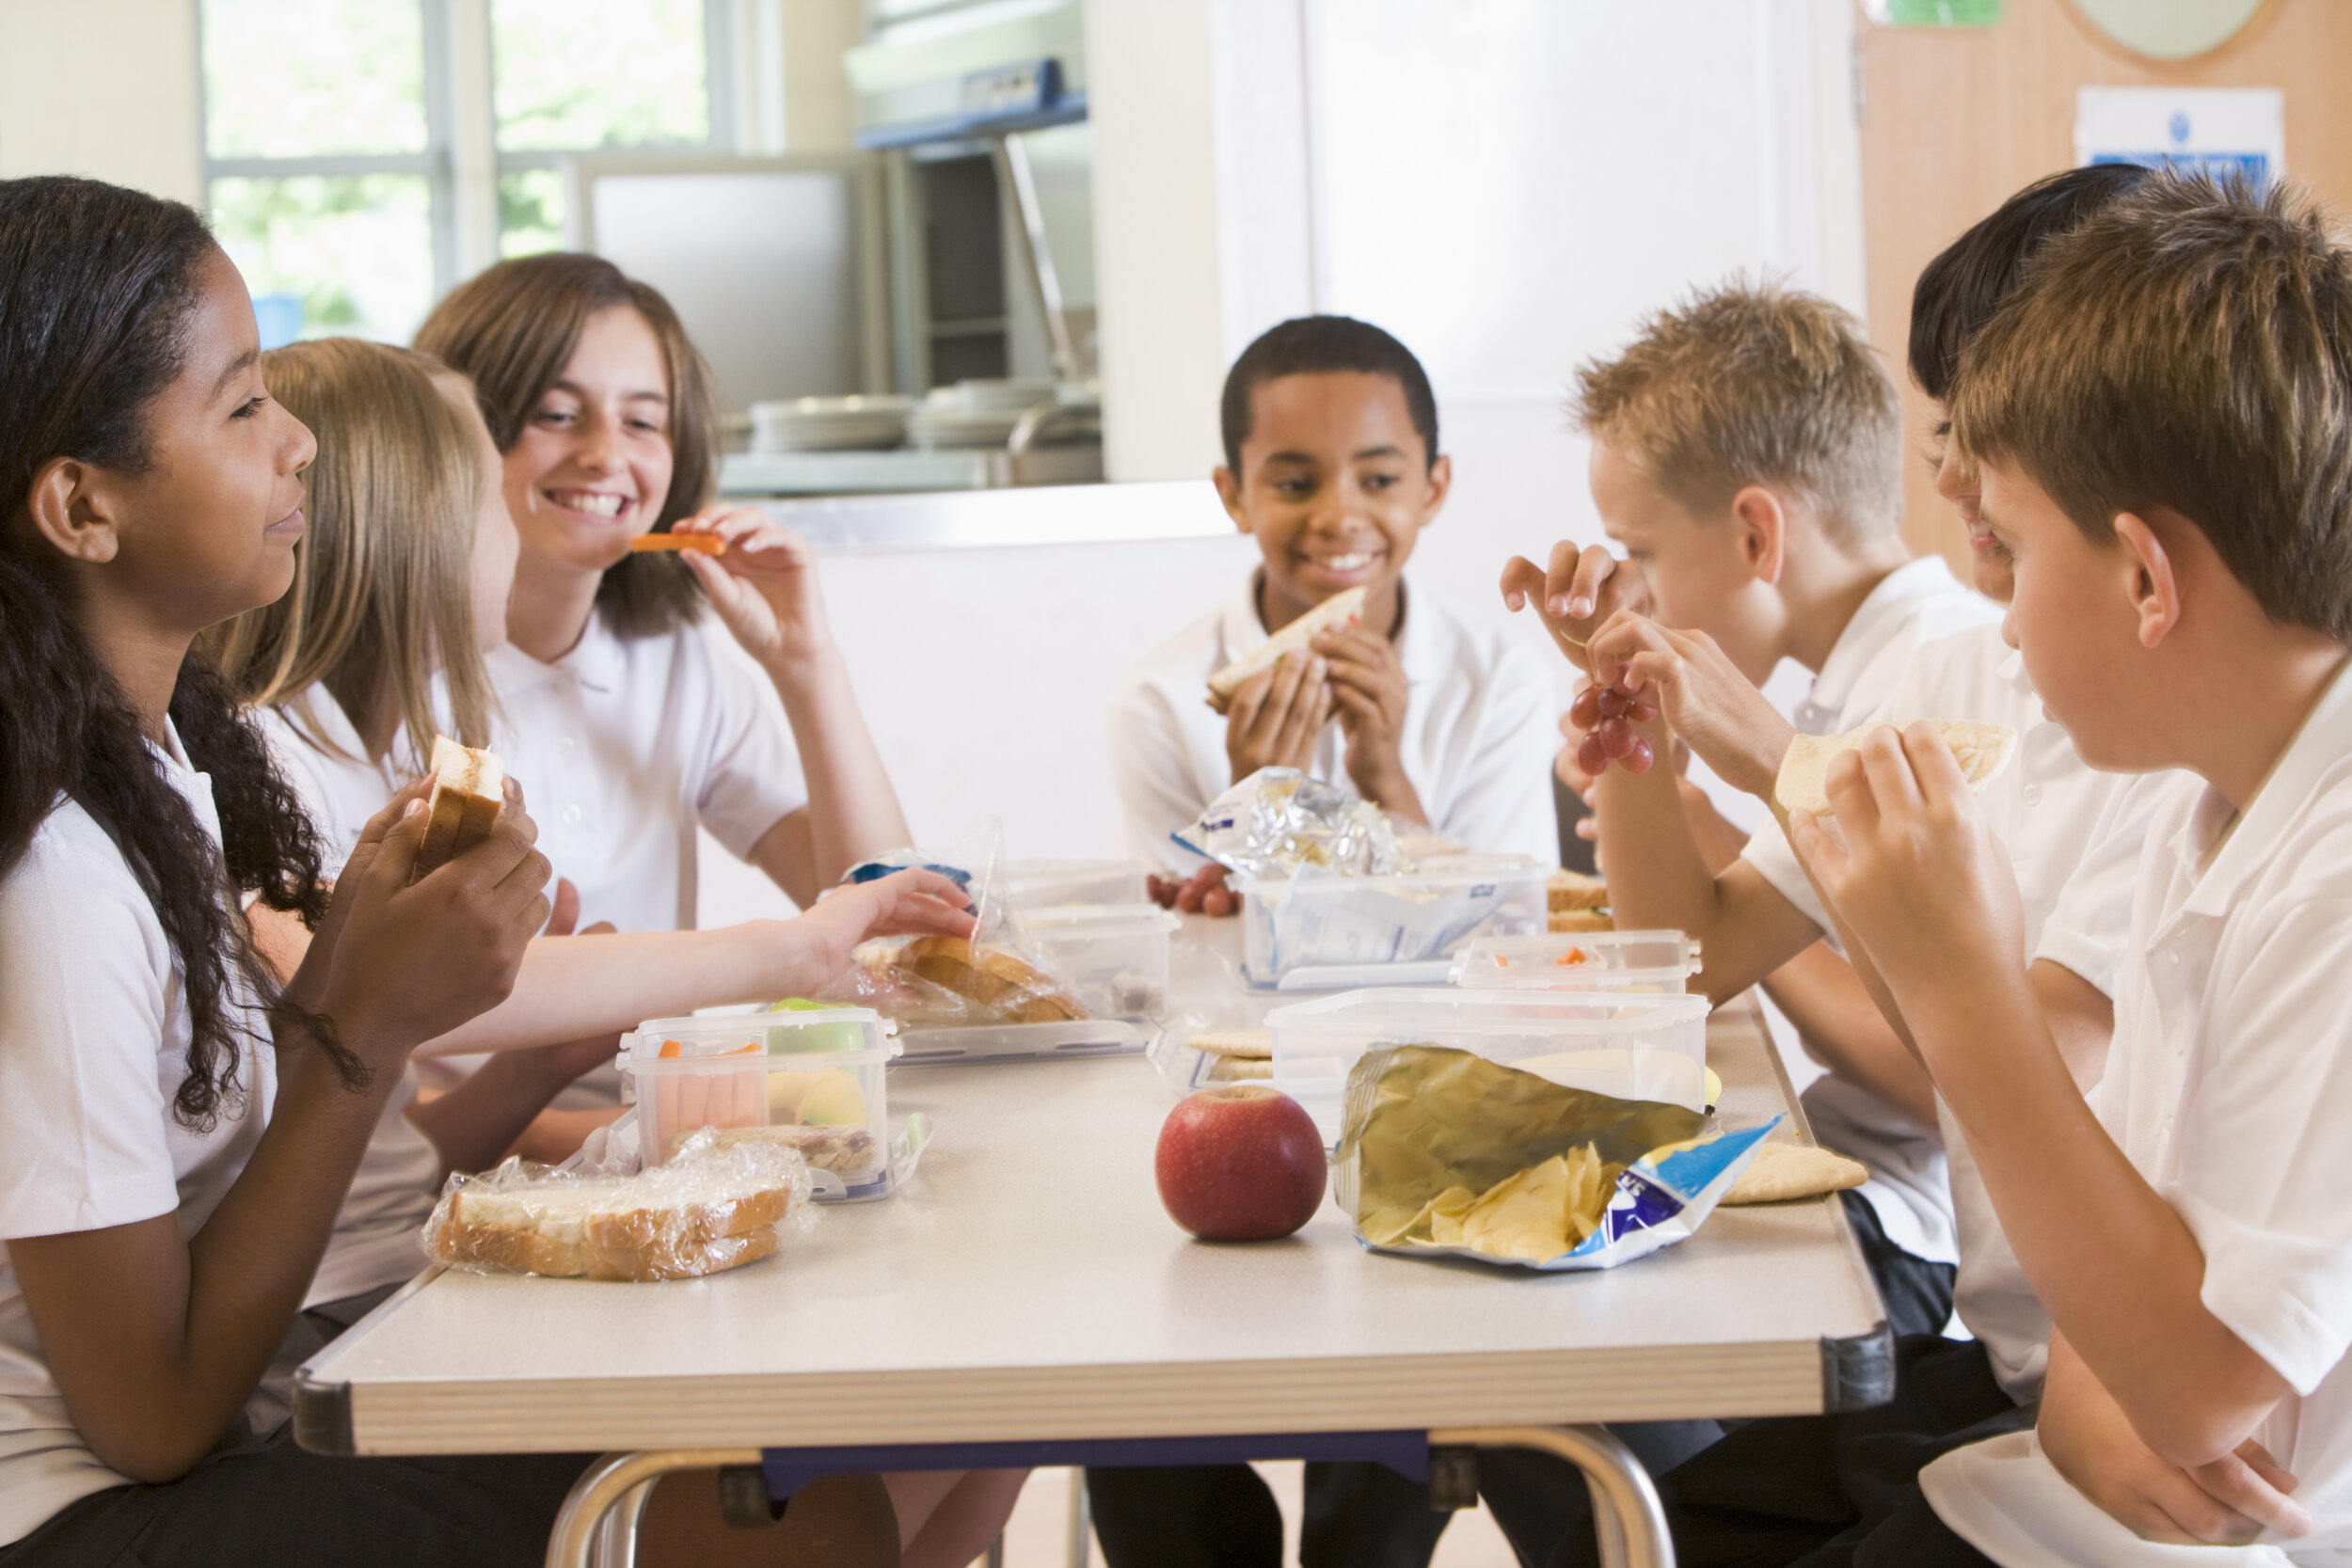 shutterstock_Children with packed lunches.jpg